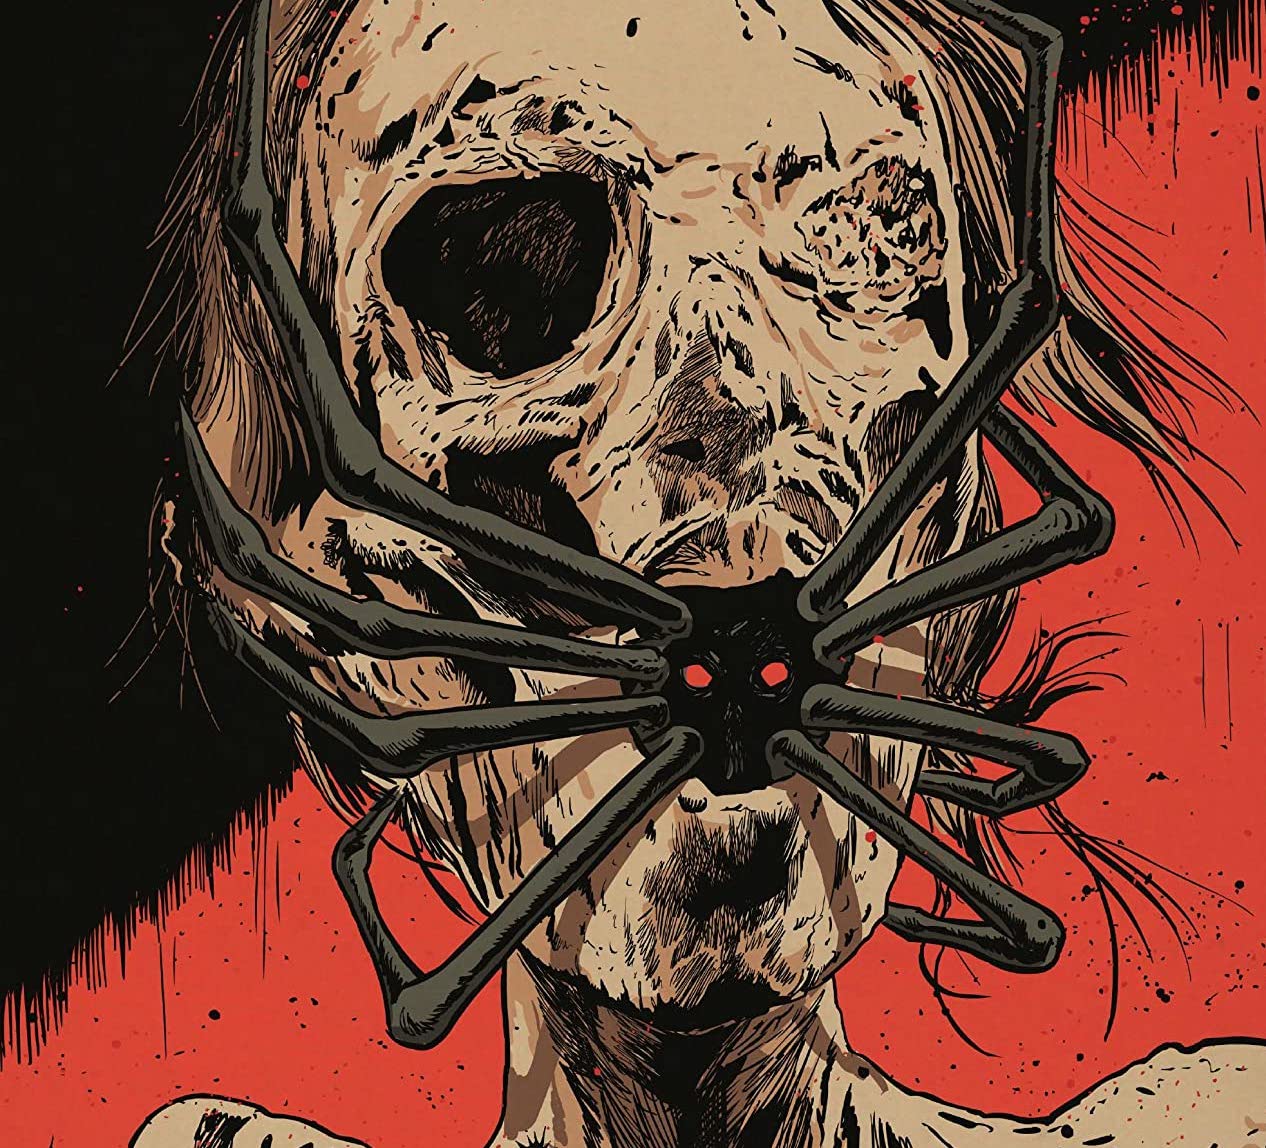 'Night of the Ghoul' #4 will make you jump out of your seat